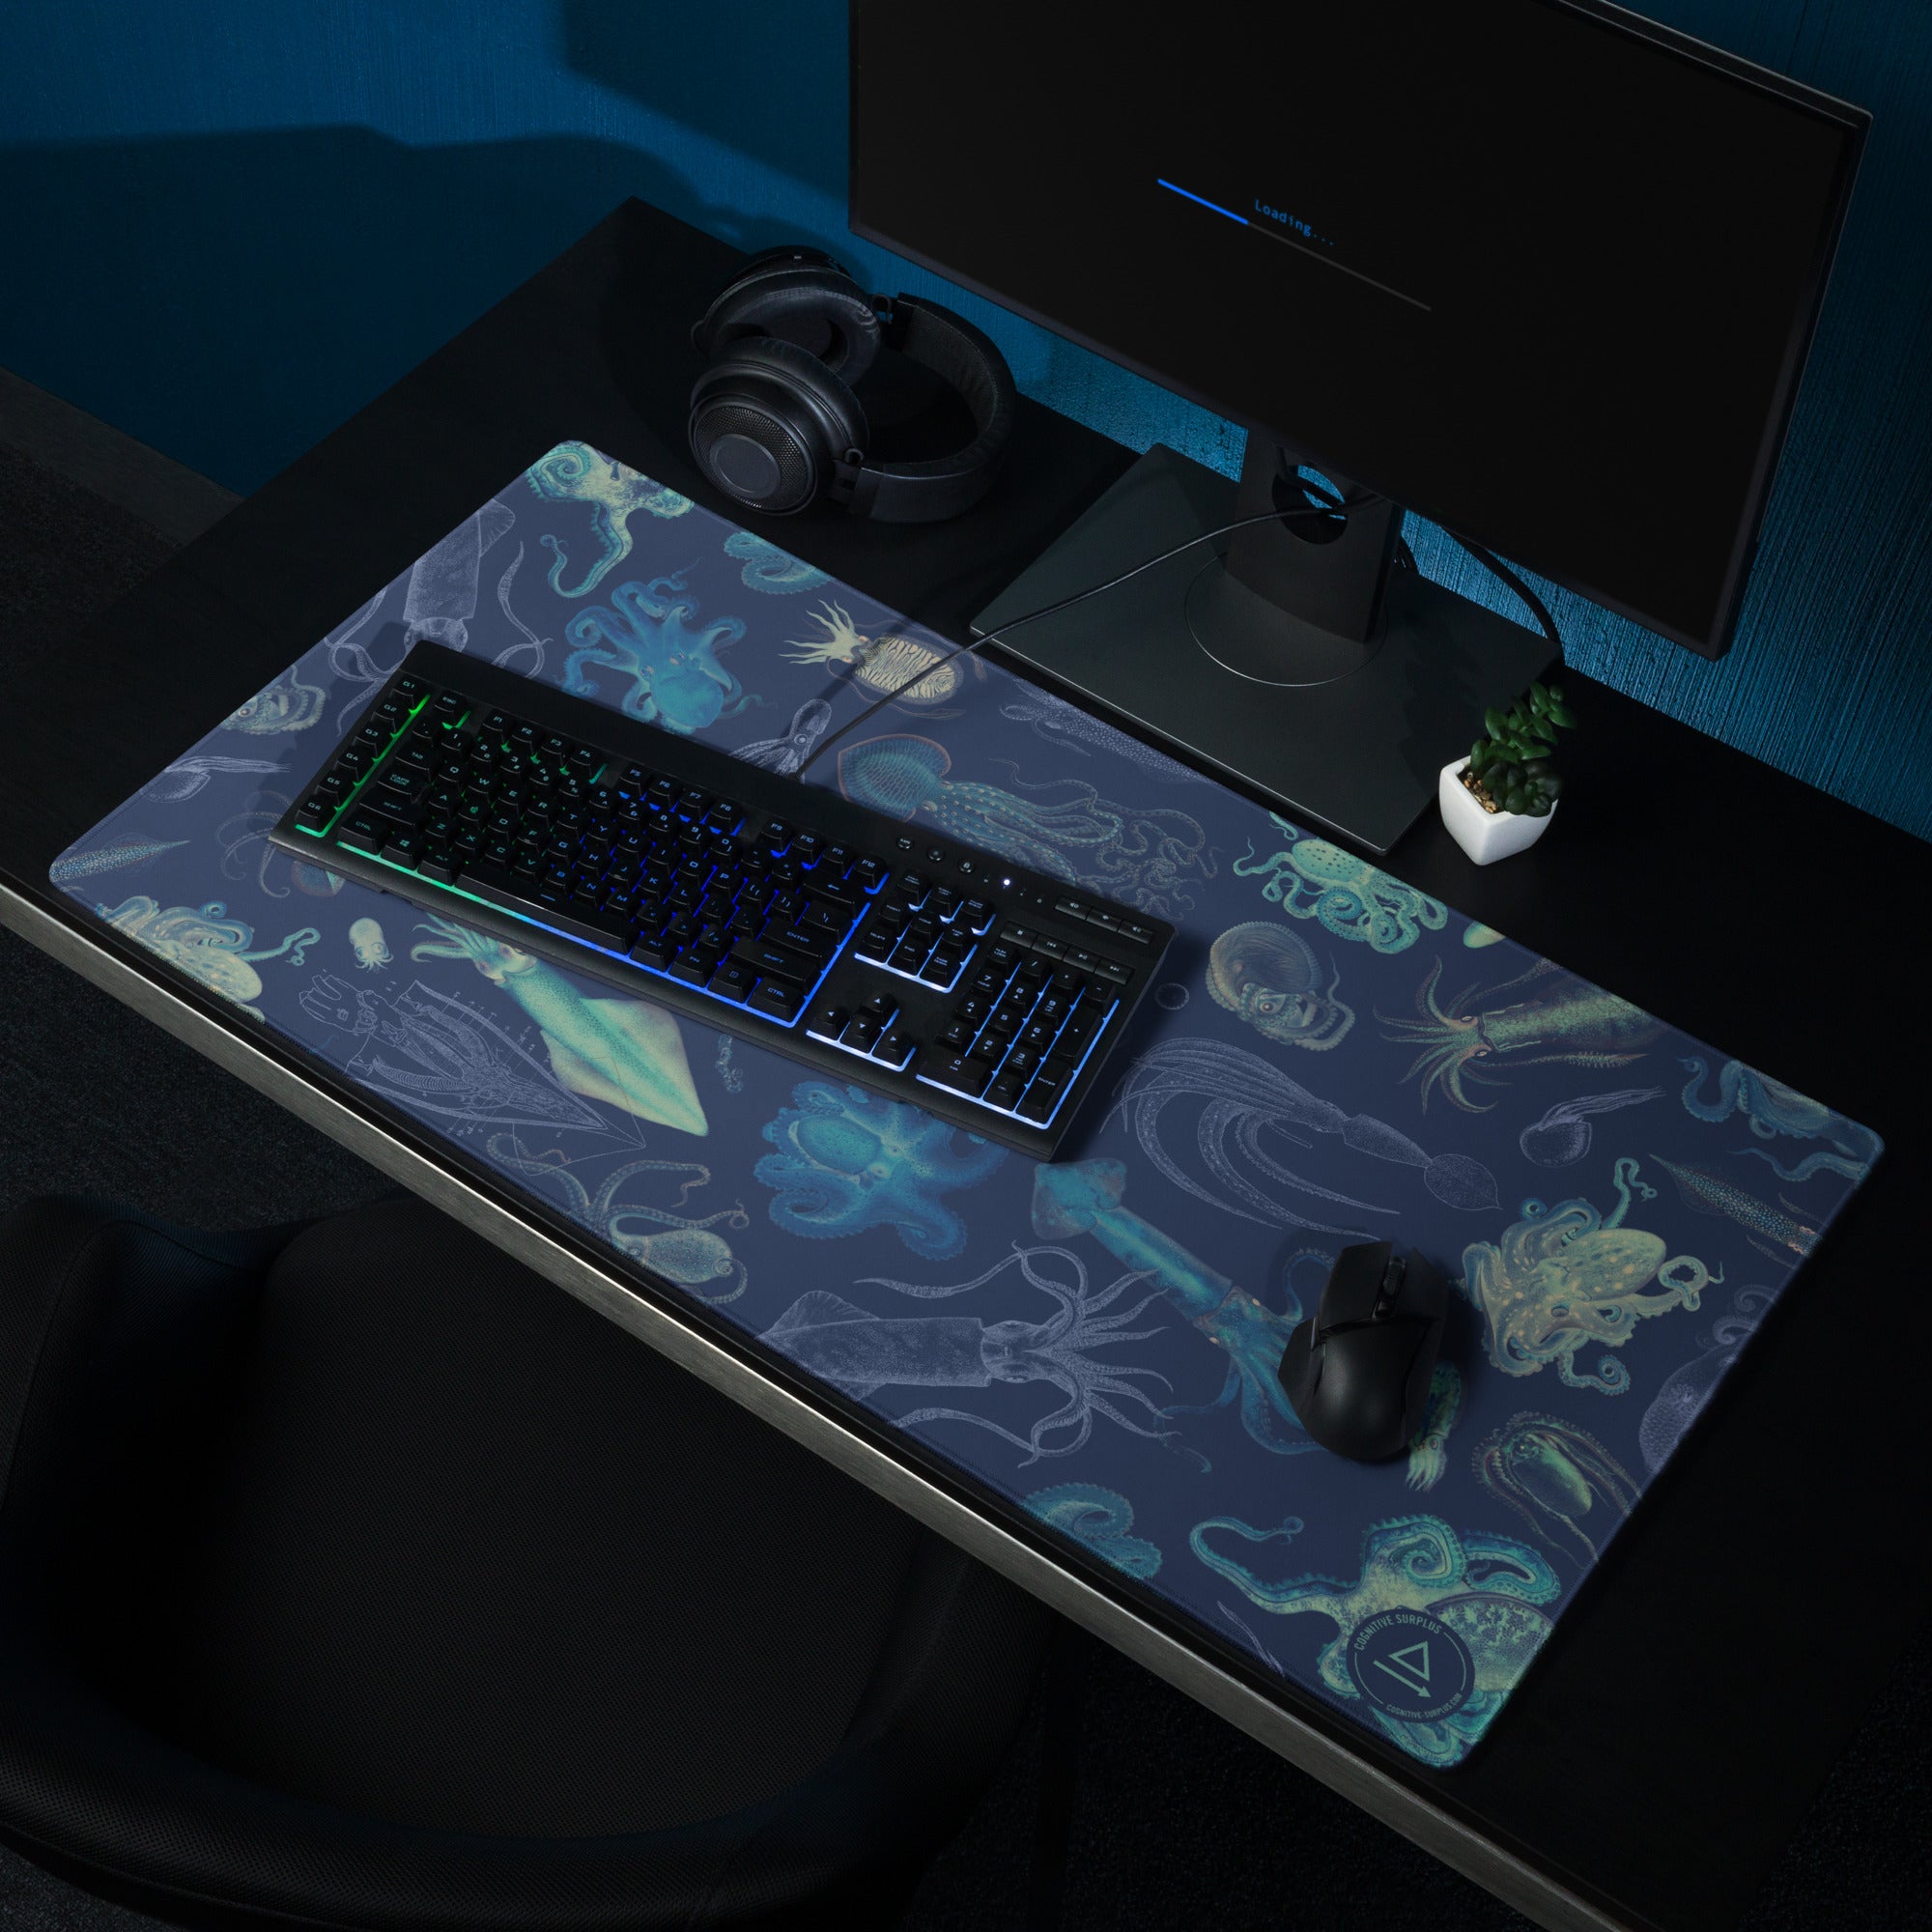 Cephalopods Gaming Mouse Pad